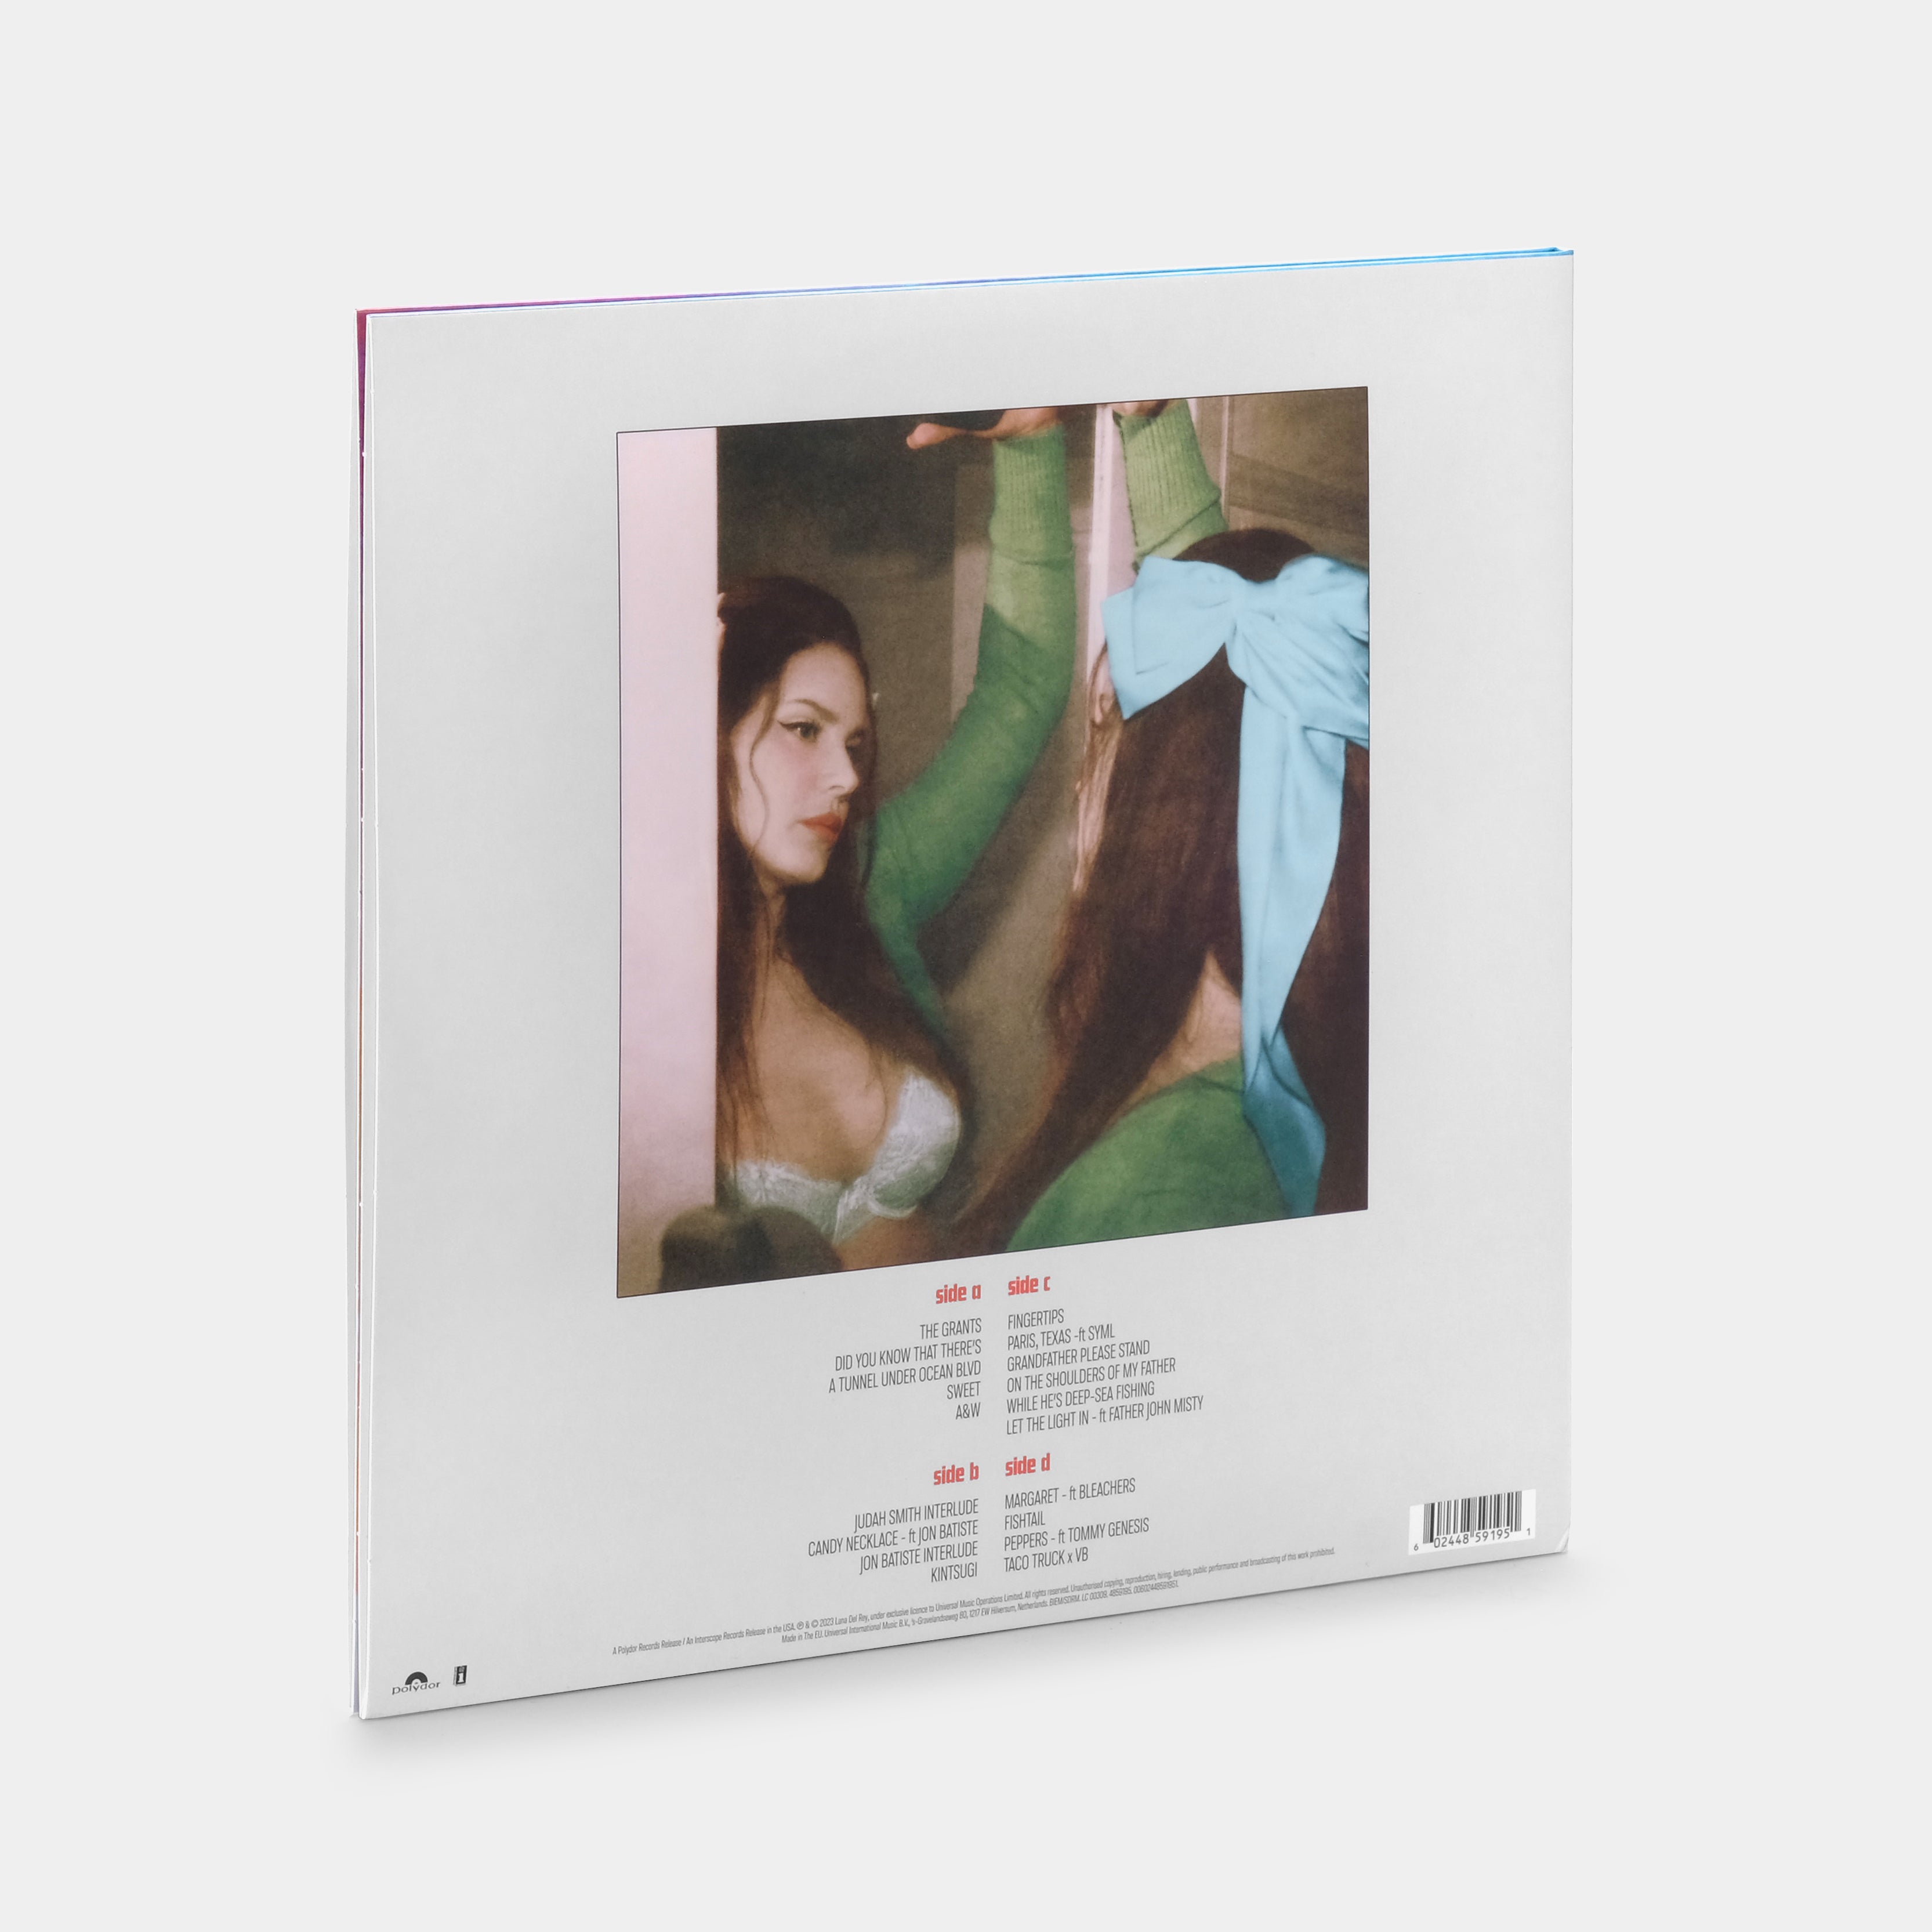 Lana Del Rey - Did You Know That There's A Tunnel Under Ocean Blvd (Alternate Artwork) 2xLP Green Vinyl Record